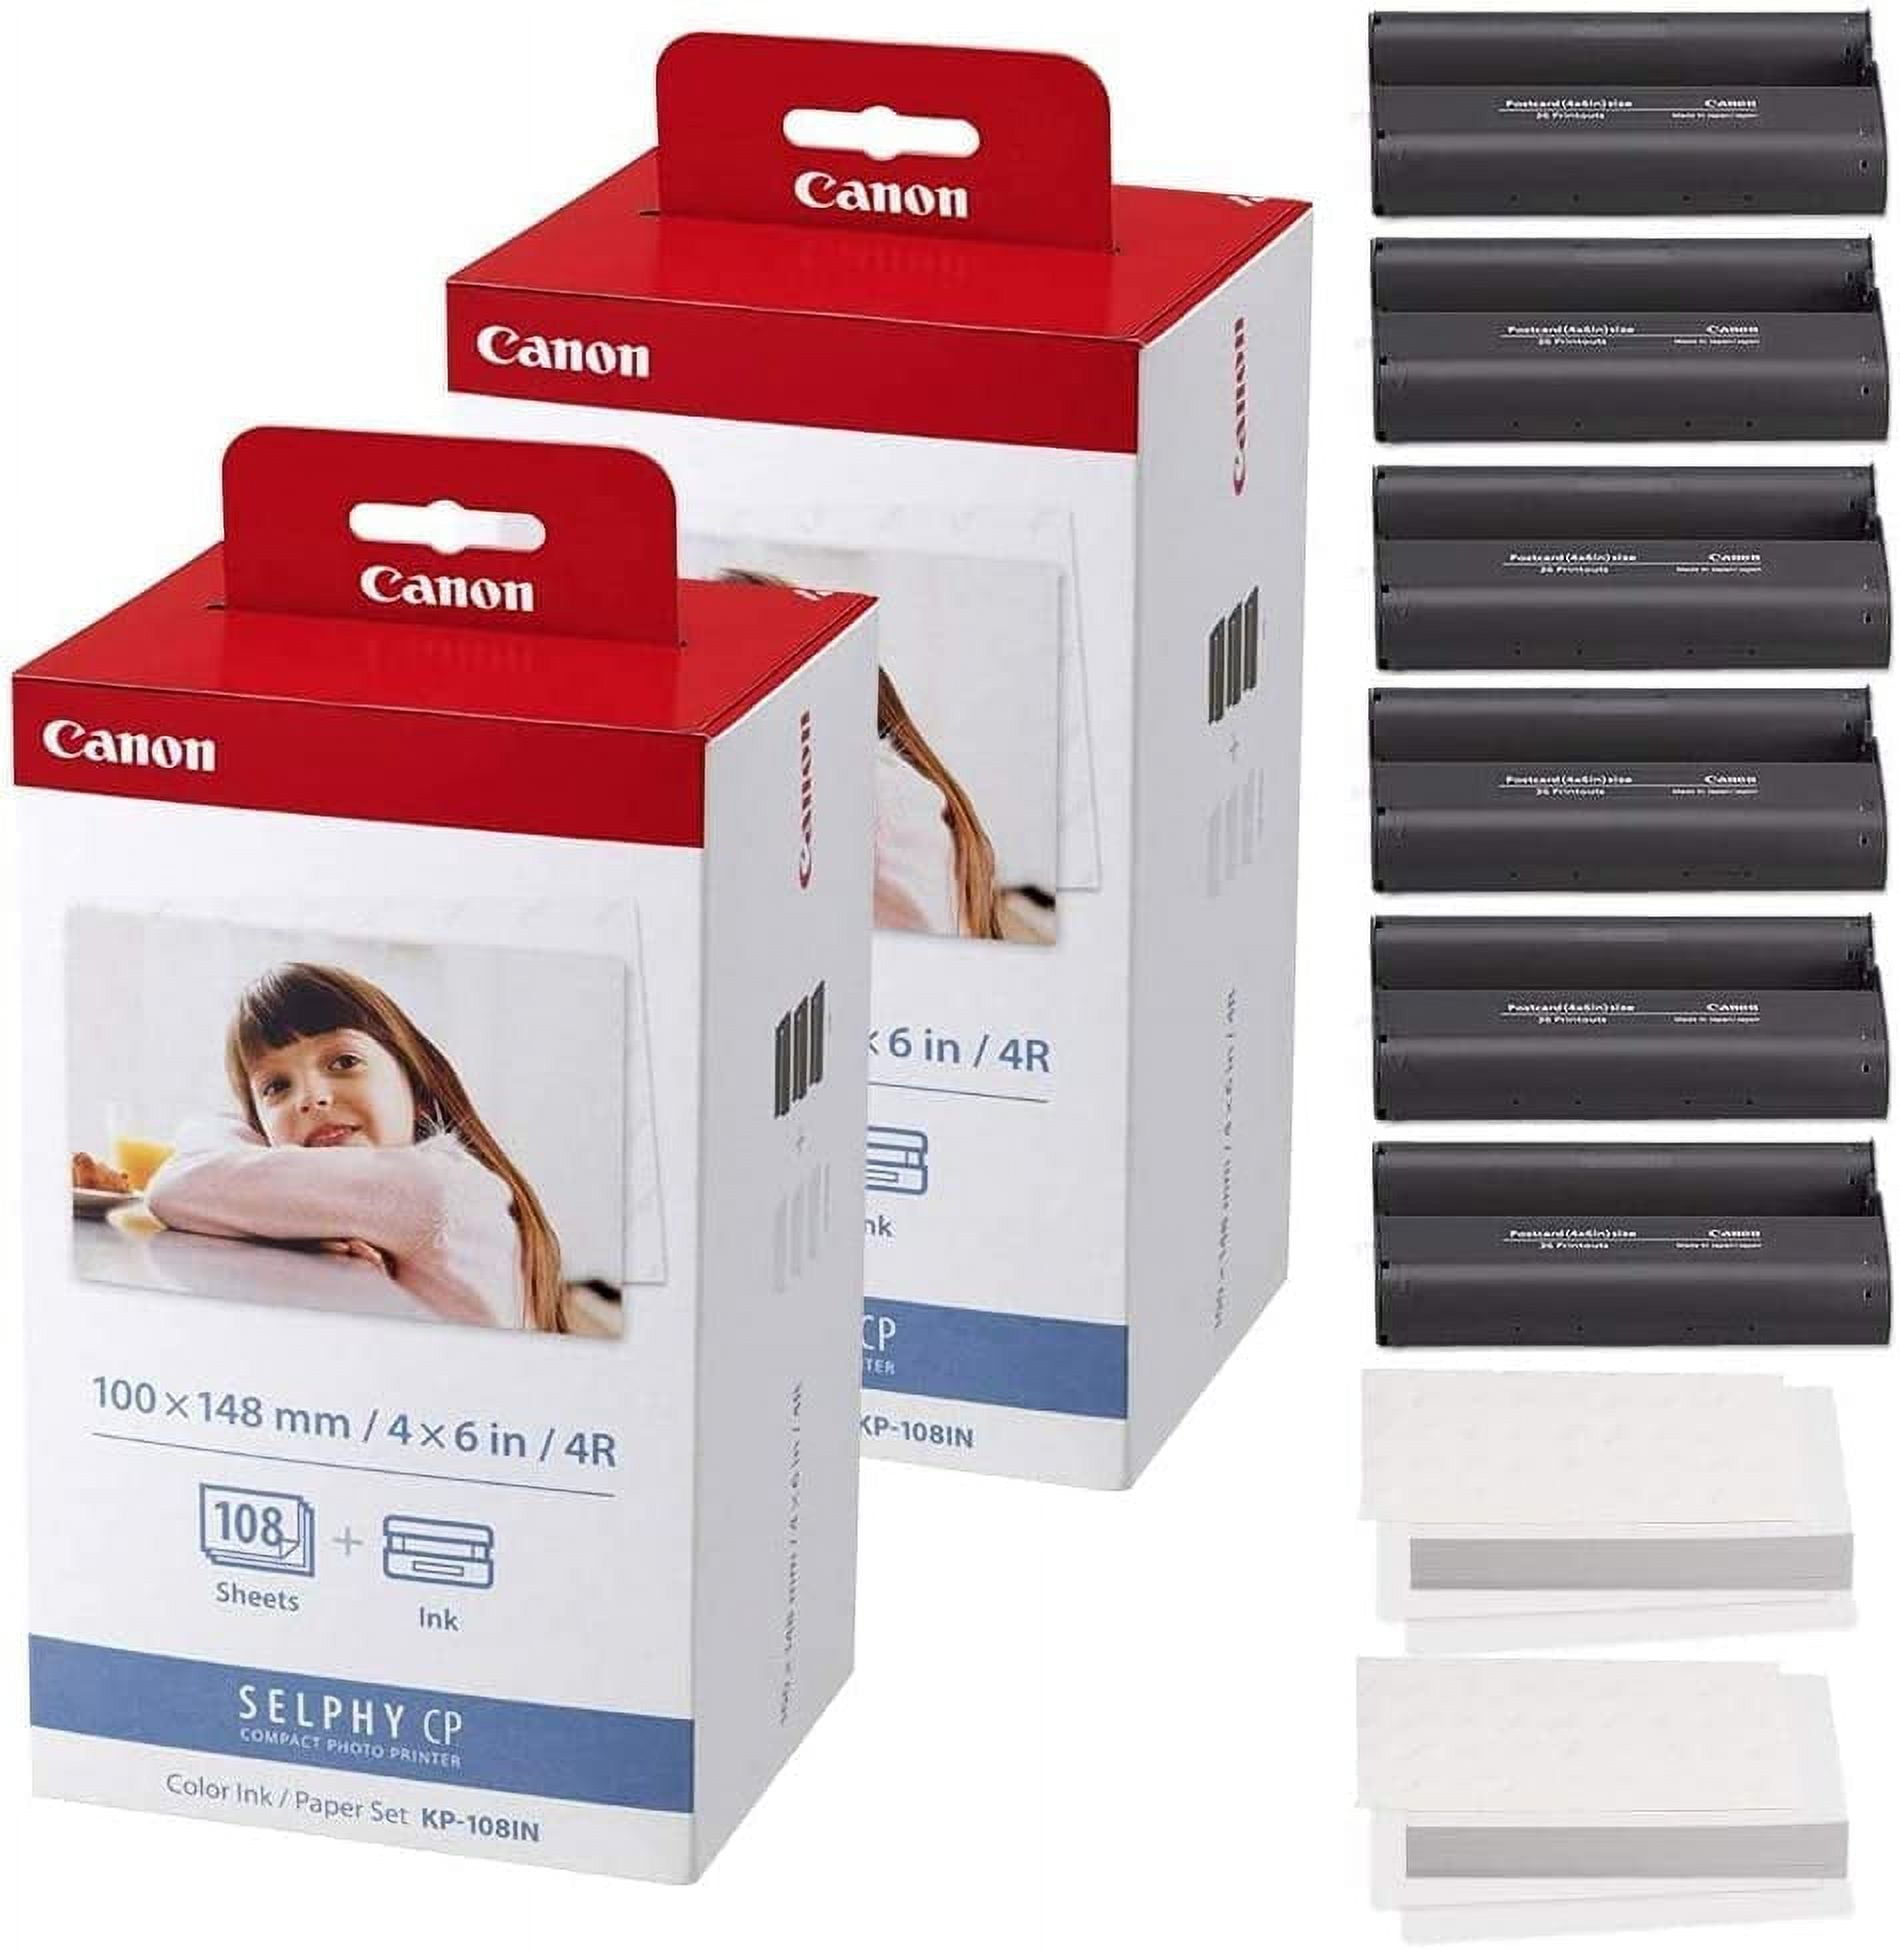 2-Pack Compatible Ink Cartridges Replacement for Canon Selphy KP-108IN  KP-36IN Color Ink Cassette 4 x 6, for Selphy CP1500 CP1300 CP1200 CP1000 CP